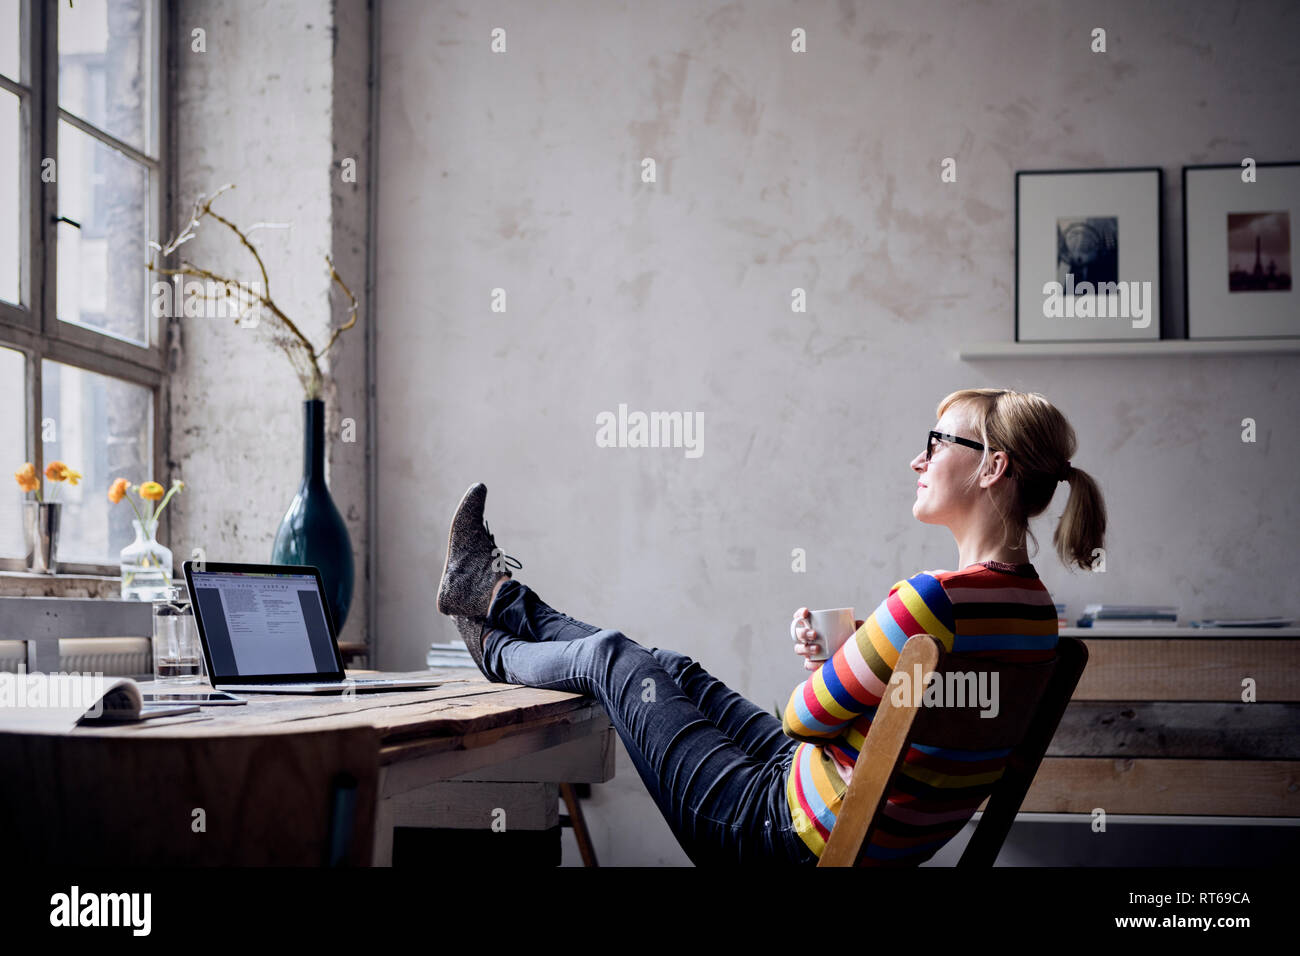 Smiling woman sitting with feet up at desk in a loft looking through window Stock Photo